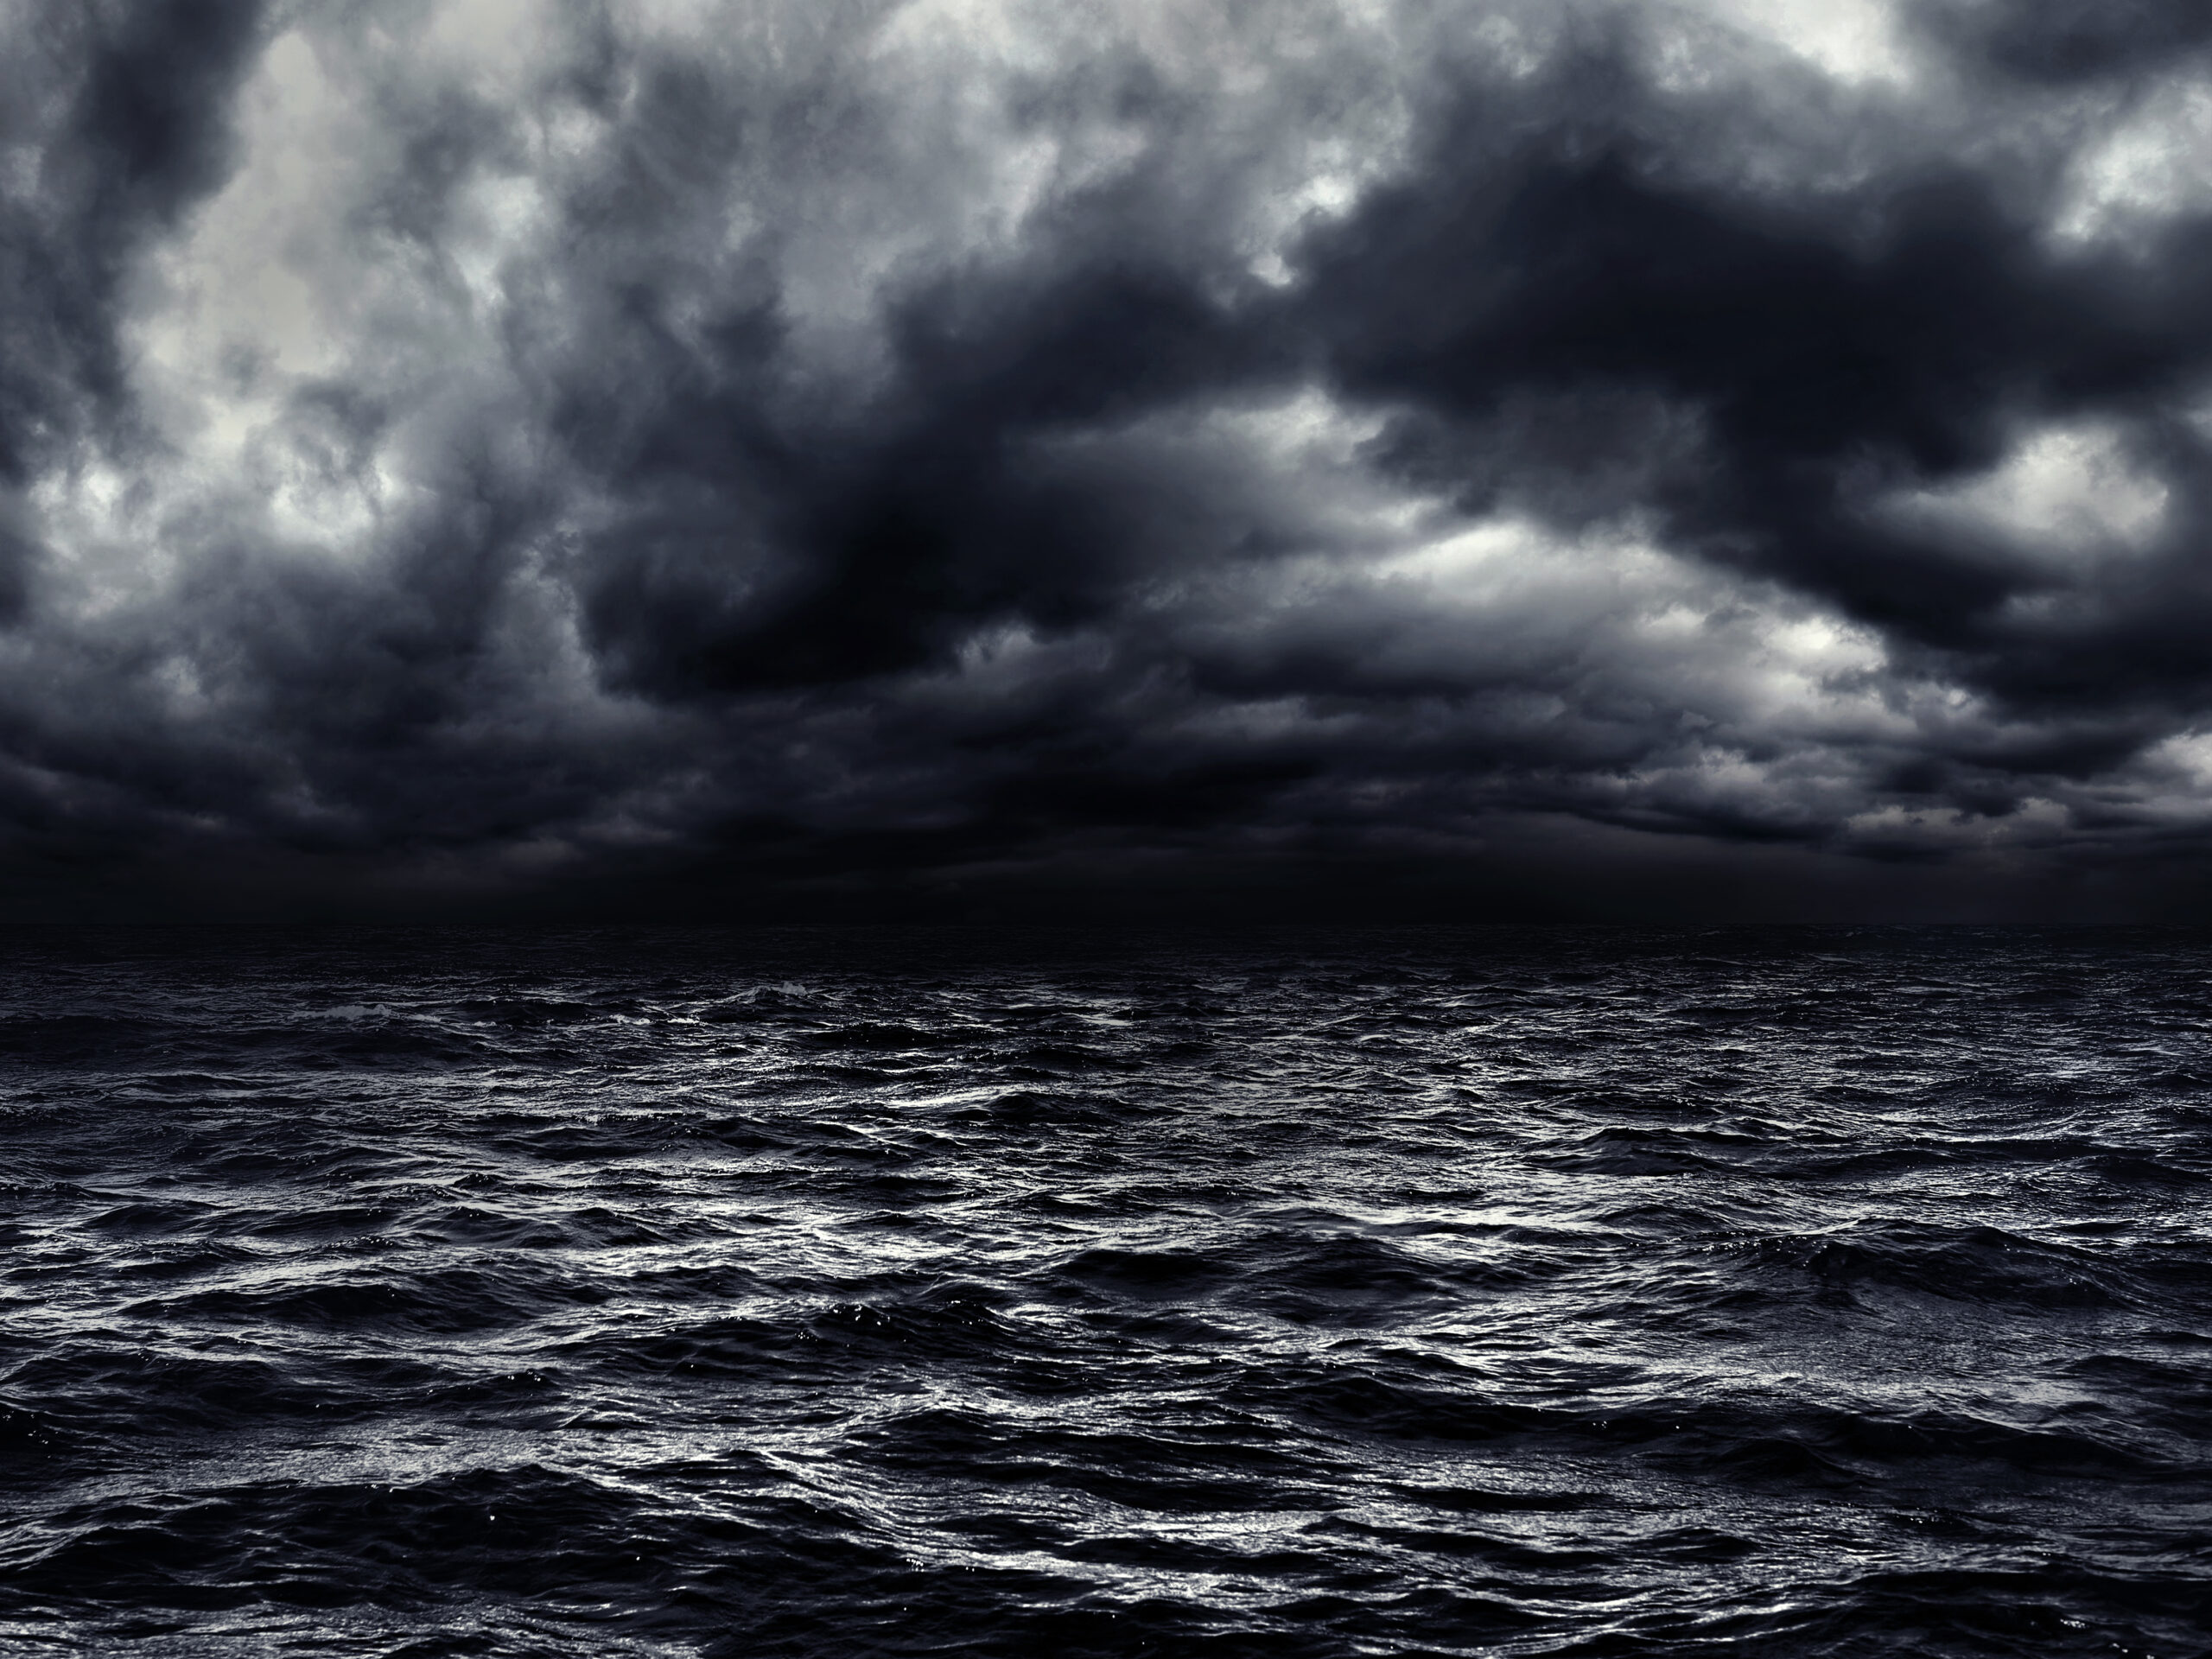 Dark stormy sea with a dramatic cloudy sky. | Source: Shutterstock